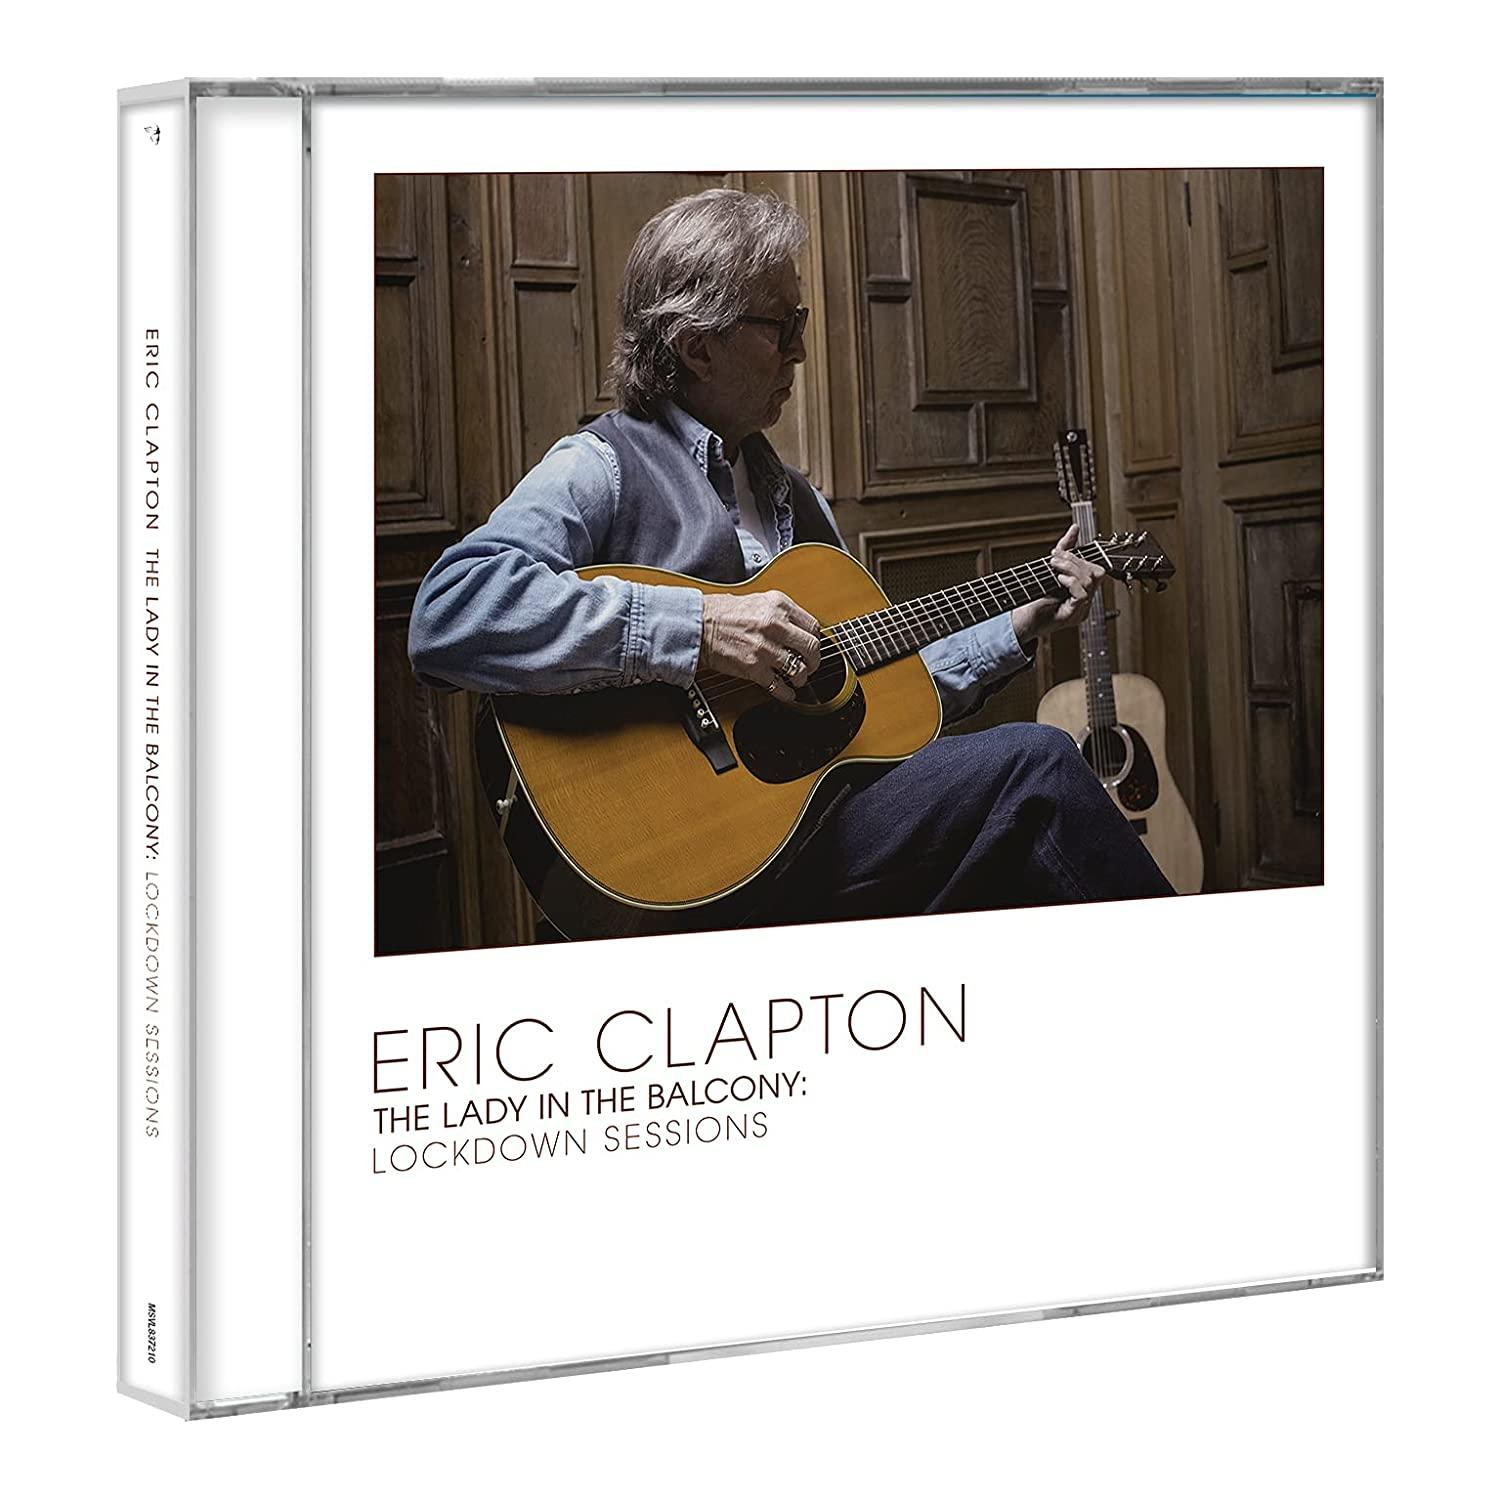 Eric Clapton - Lady In Lockdown (CD) - (Limited Edition) The Sessions Balcony